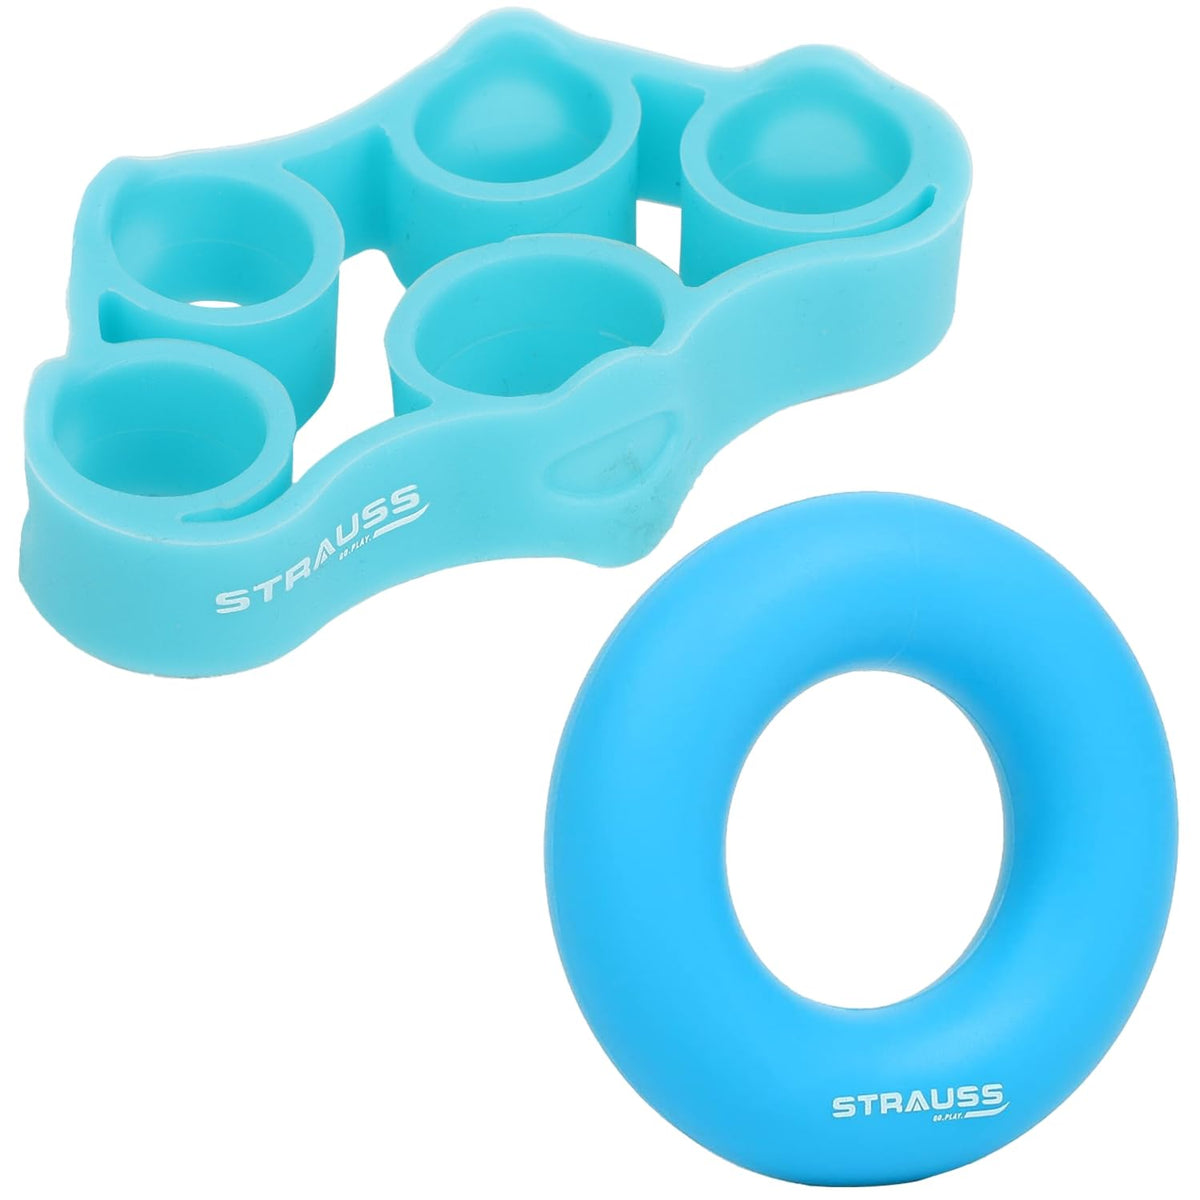 Strauss Finger Stretcher | Hand Strengthener for Carpal Tunnel Relief and Grip Strength | Silicone Finger Gripper and Finger Stretcher | Ideal for All Skill Levels | Set of 2,(Blue)